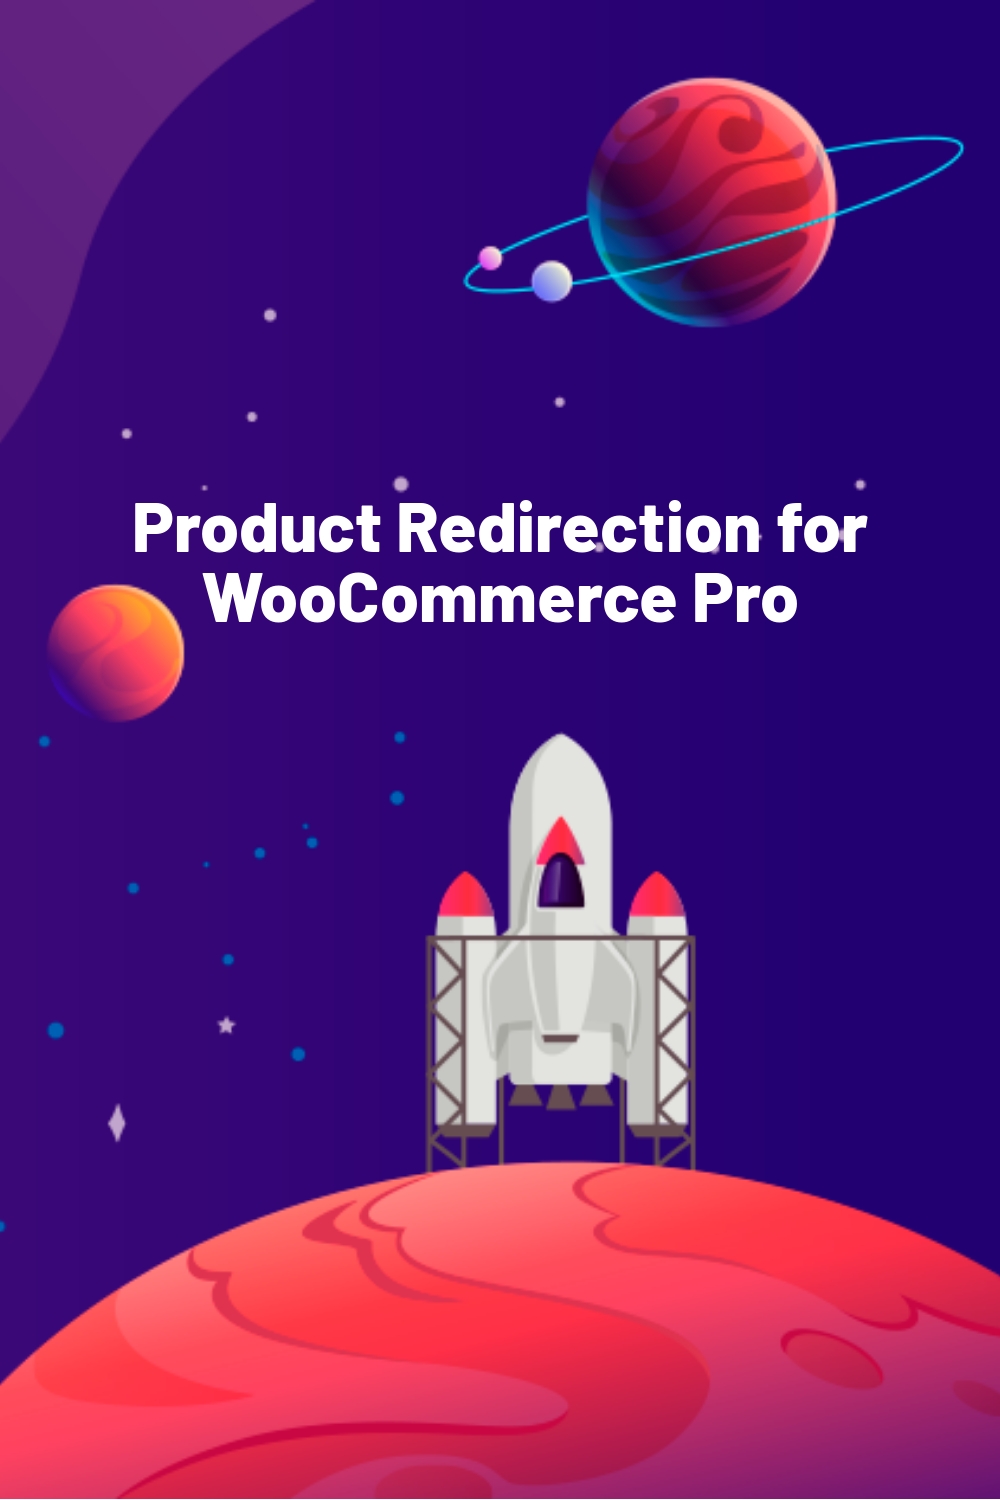 Product Redirection for WooCommerce Pro